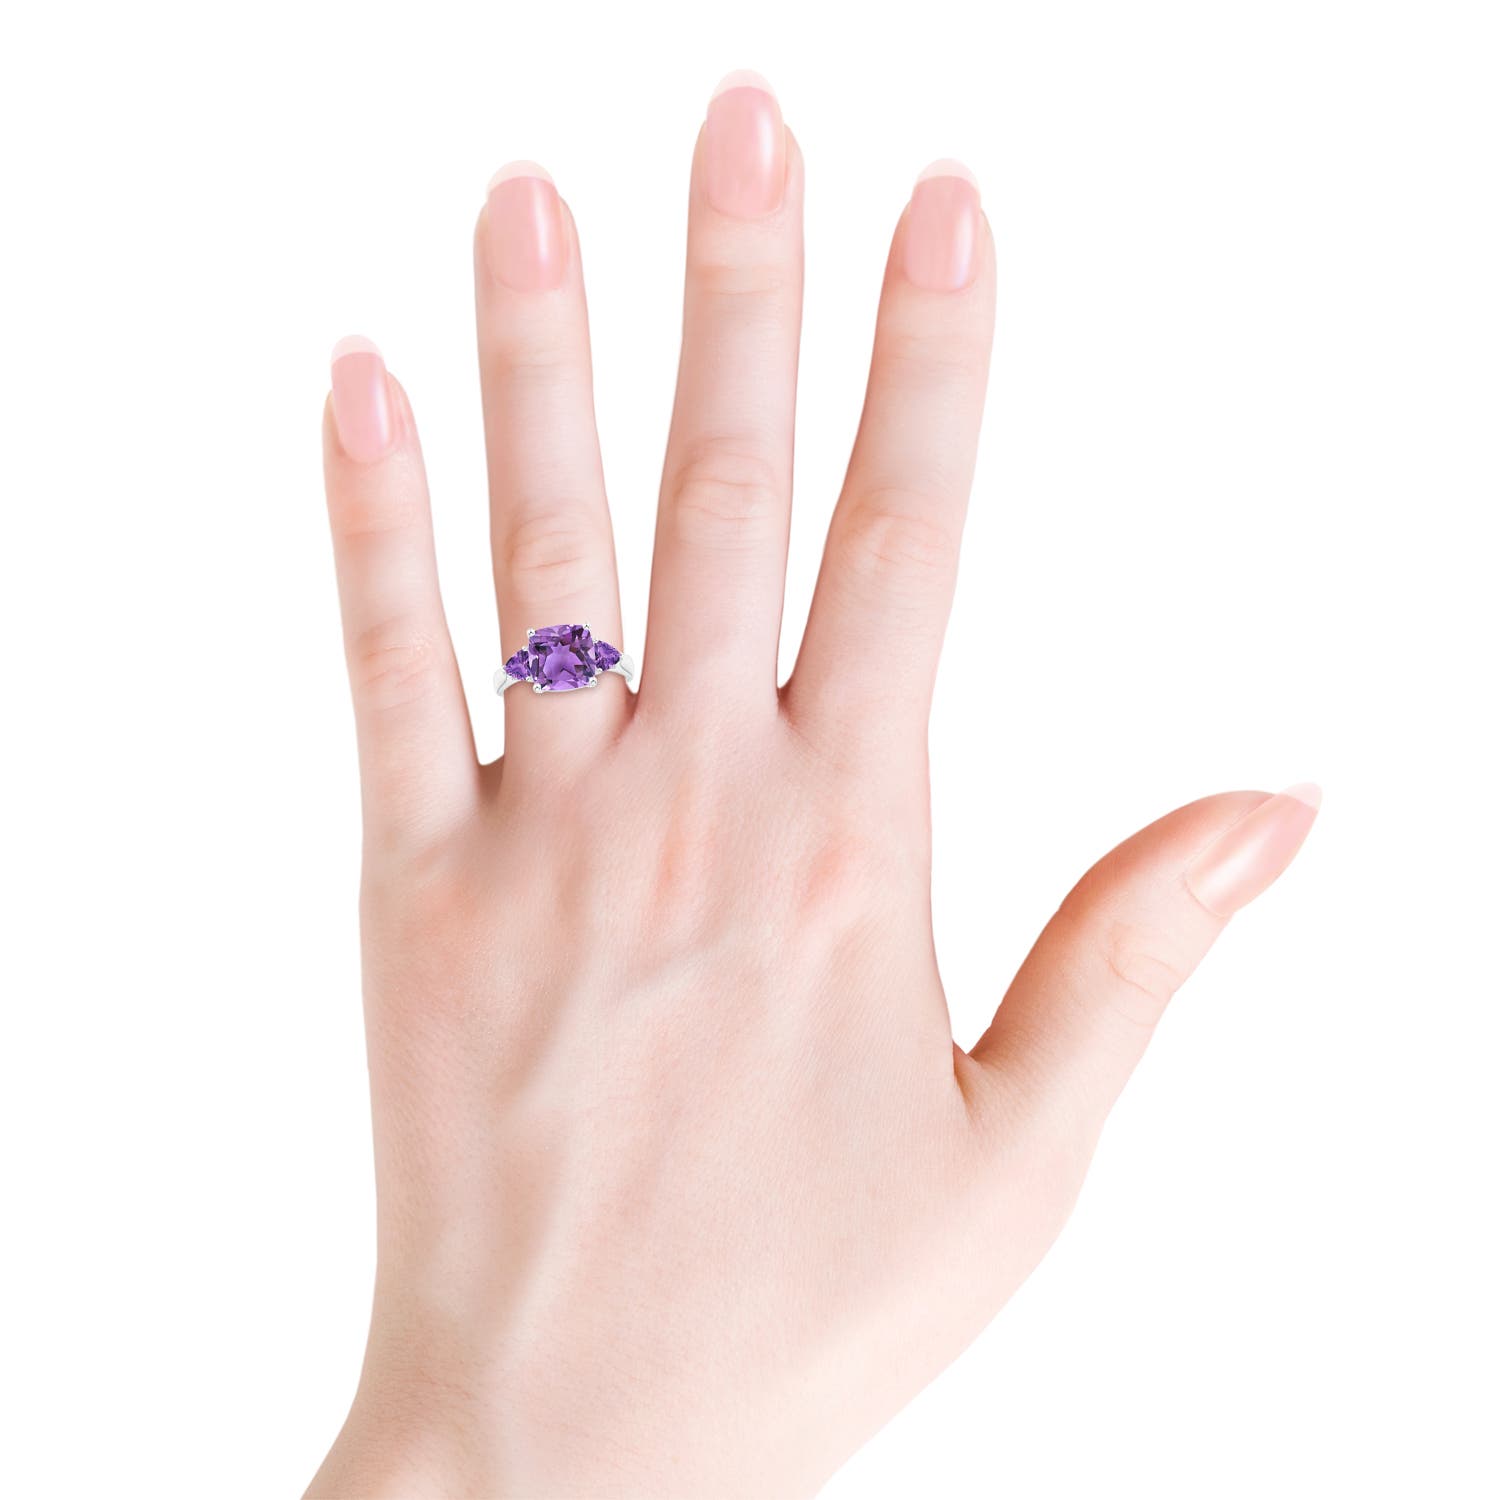 AA - Amethyst / 3.9 CT / 14 KT White Gold